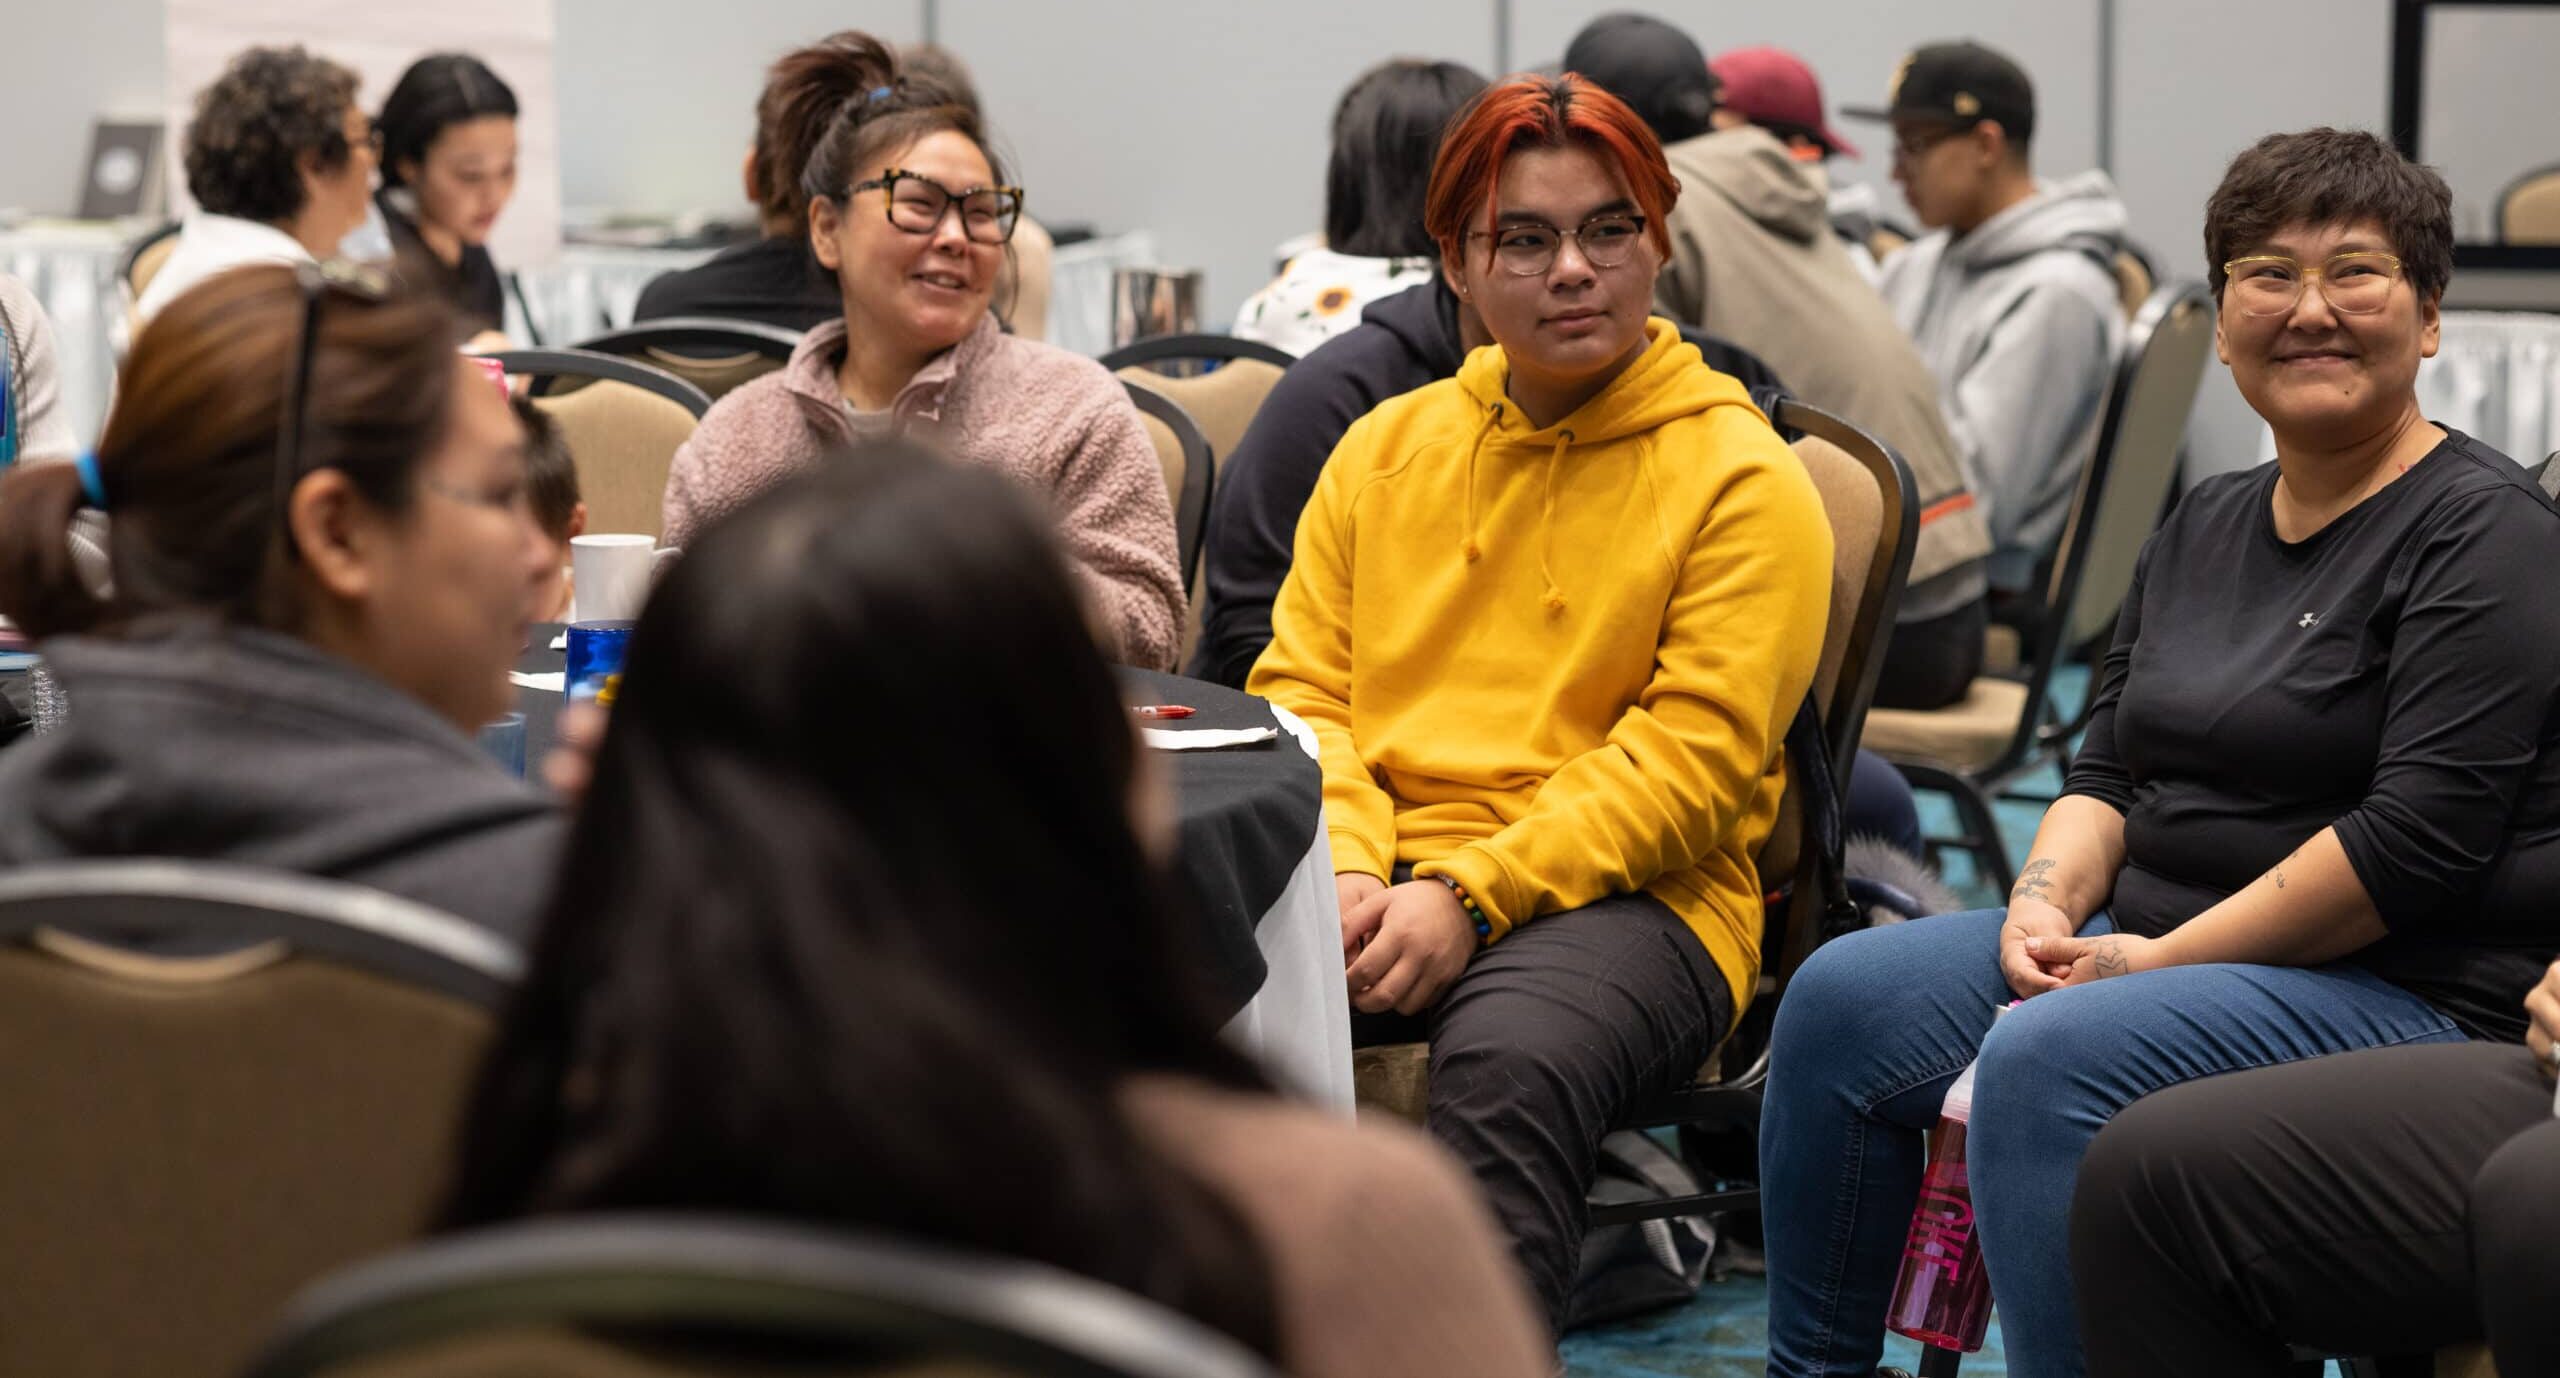 A room full of Inuit youth listening to a presentation